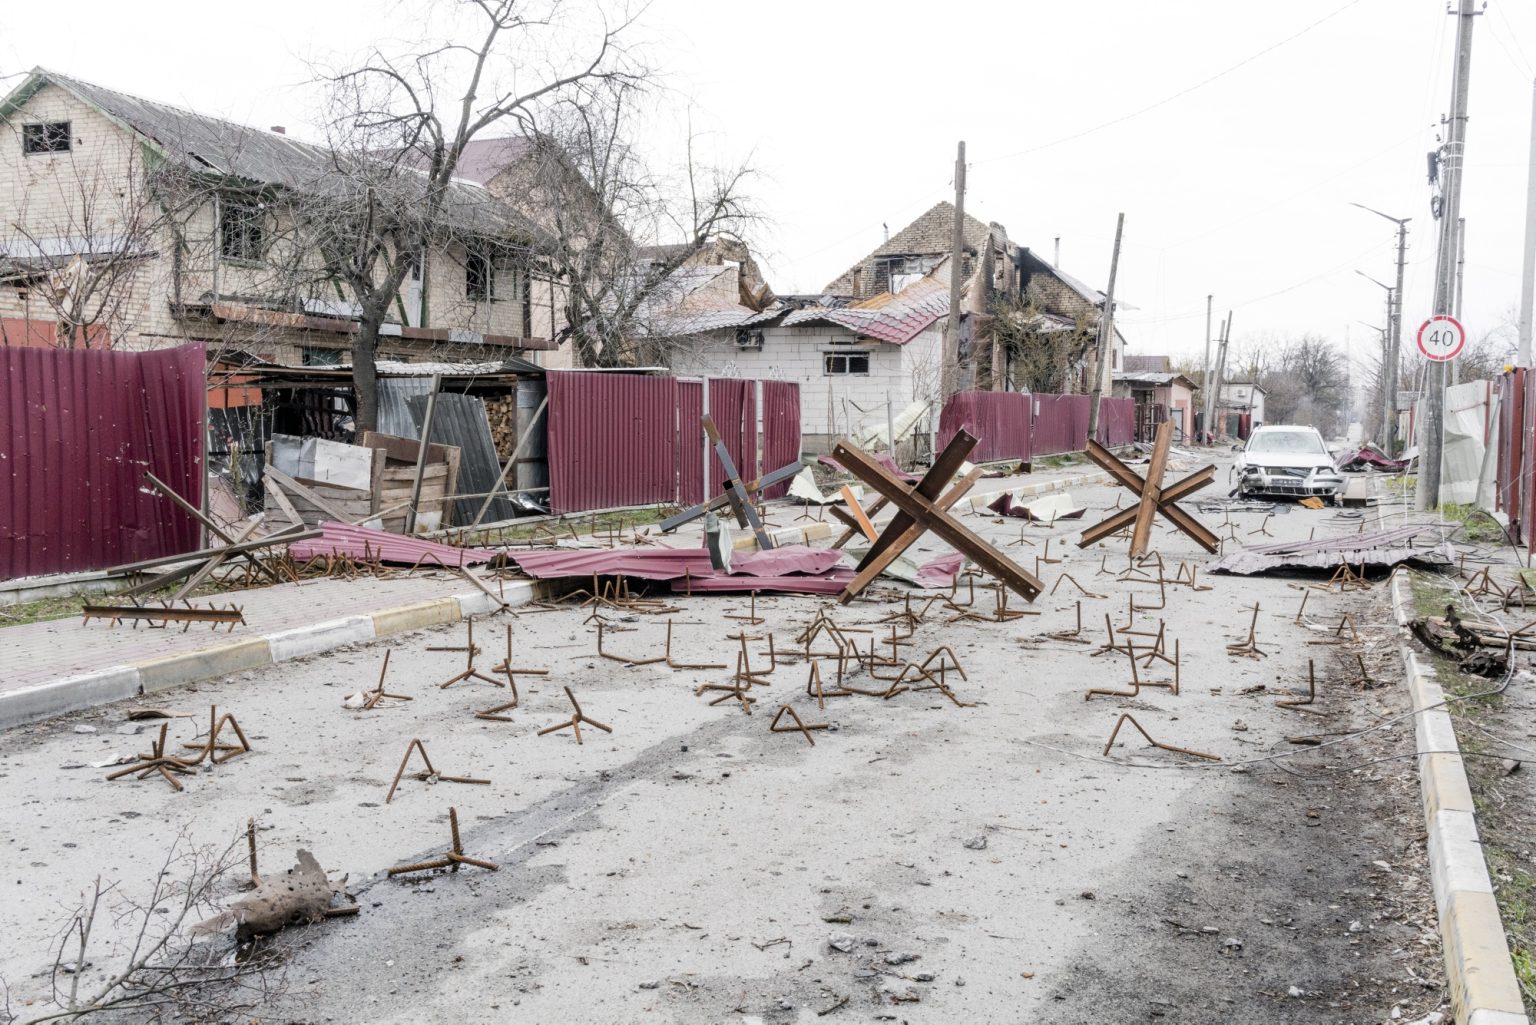 01563893 UKRAINE, Bucha. April 06, 2022 - Barricades near the bridge that conncects Irpin and Bucha.*** SPECIAL   FEE   APPLIES *** *** Local Caption *** 01563893